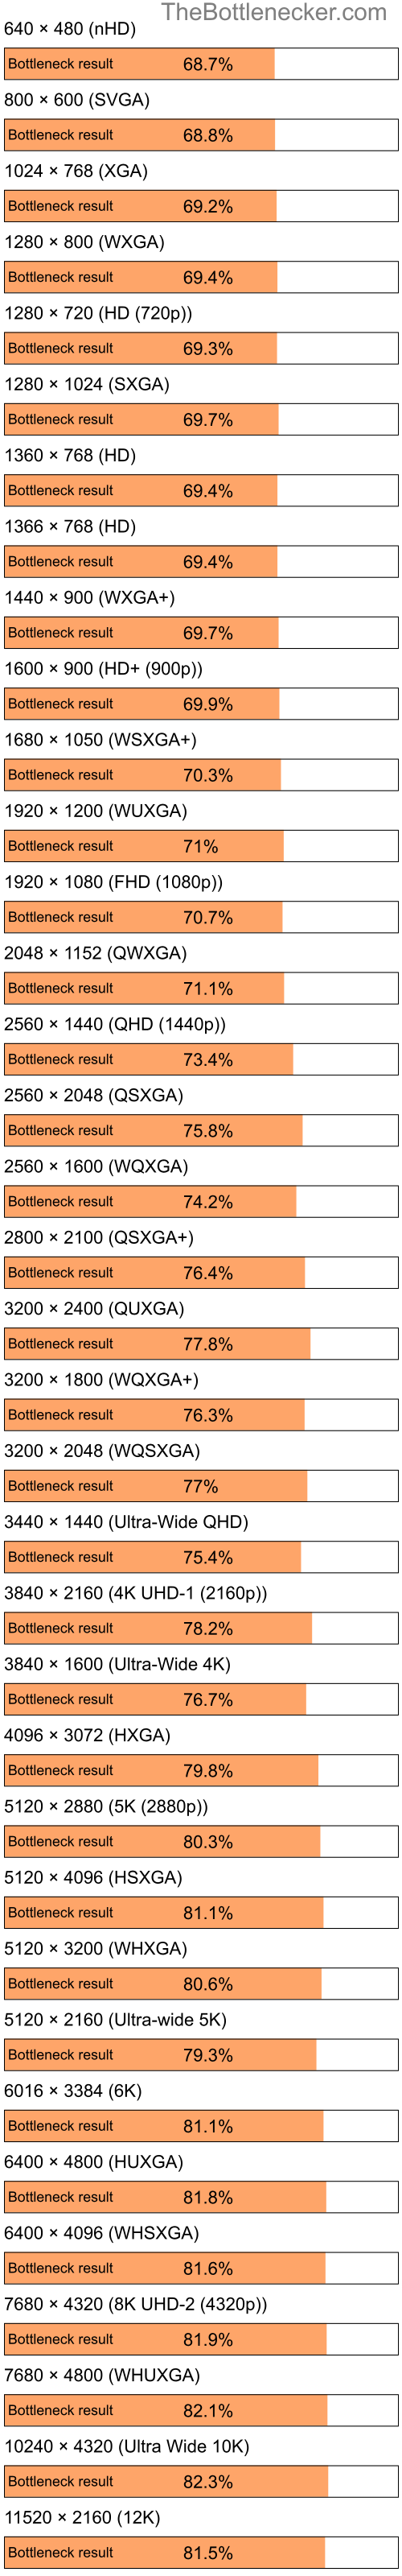 Bottleneck results by resolution for Intel Pentium 4 and AMD Mobility Radeon X700 in General Tasks